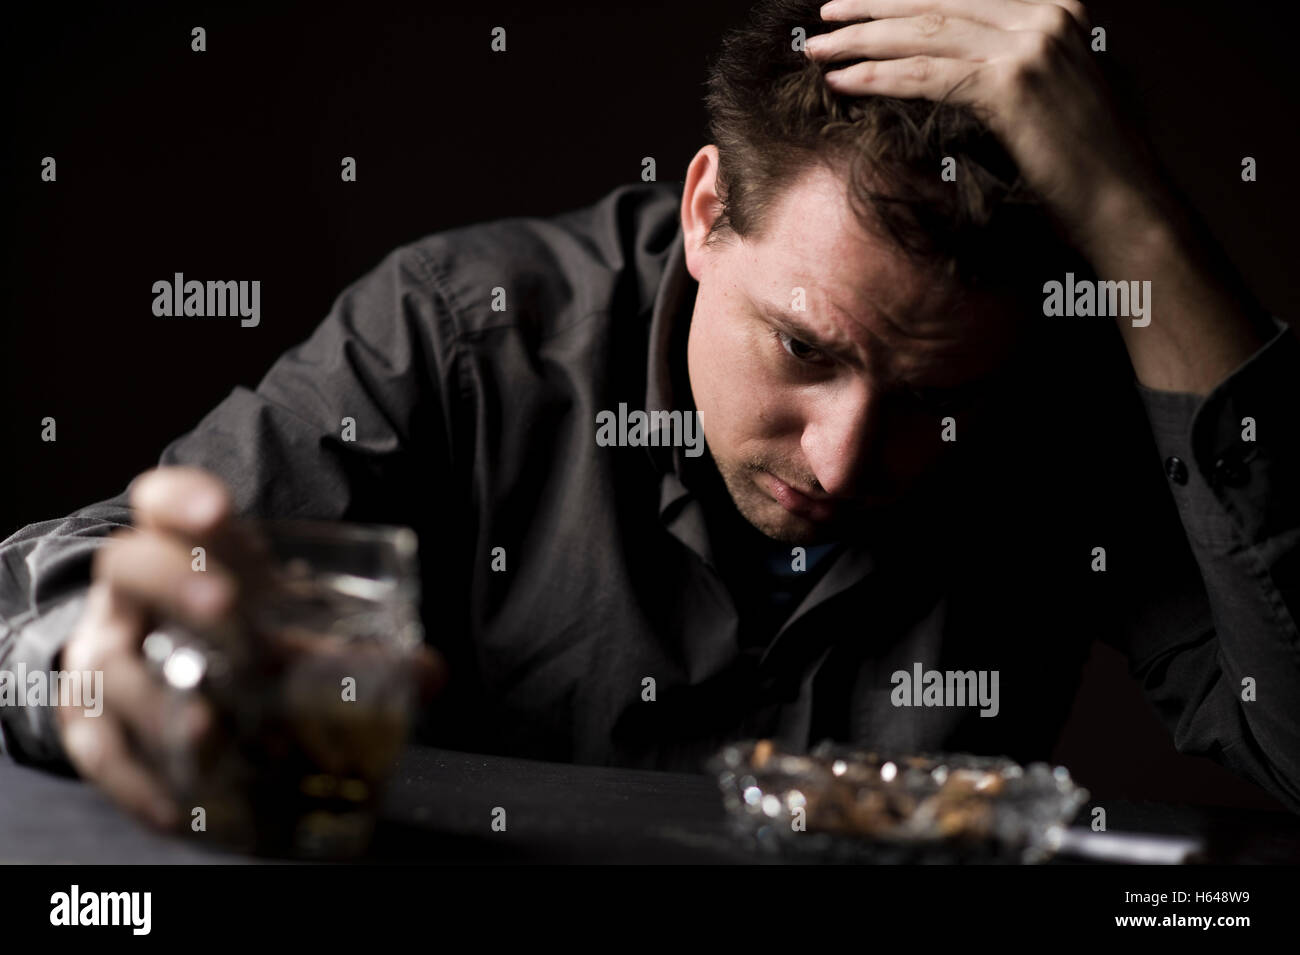 Frustrated man drinking beer Stock Photo